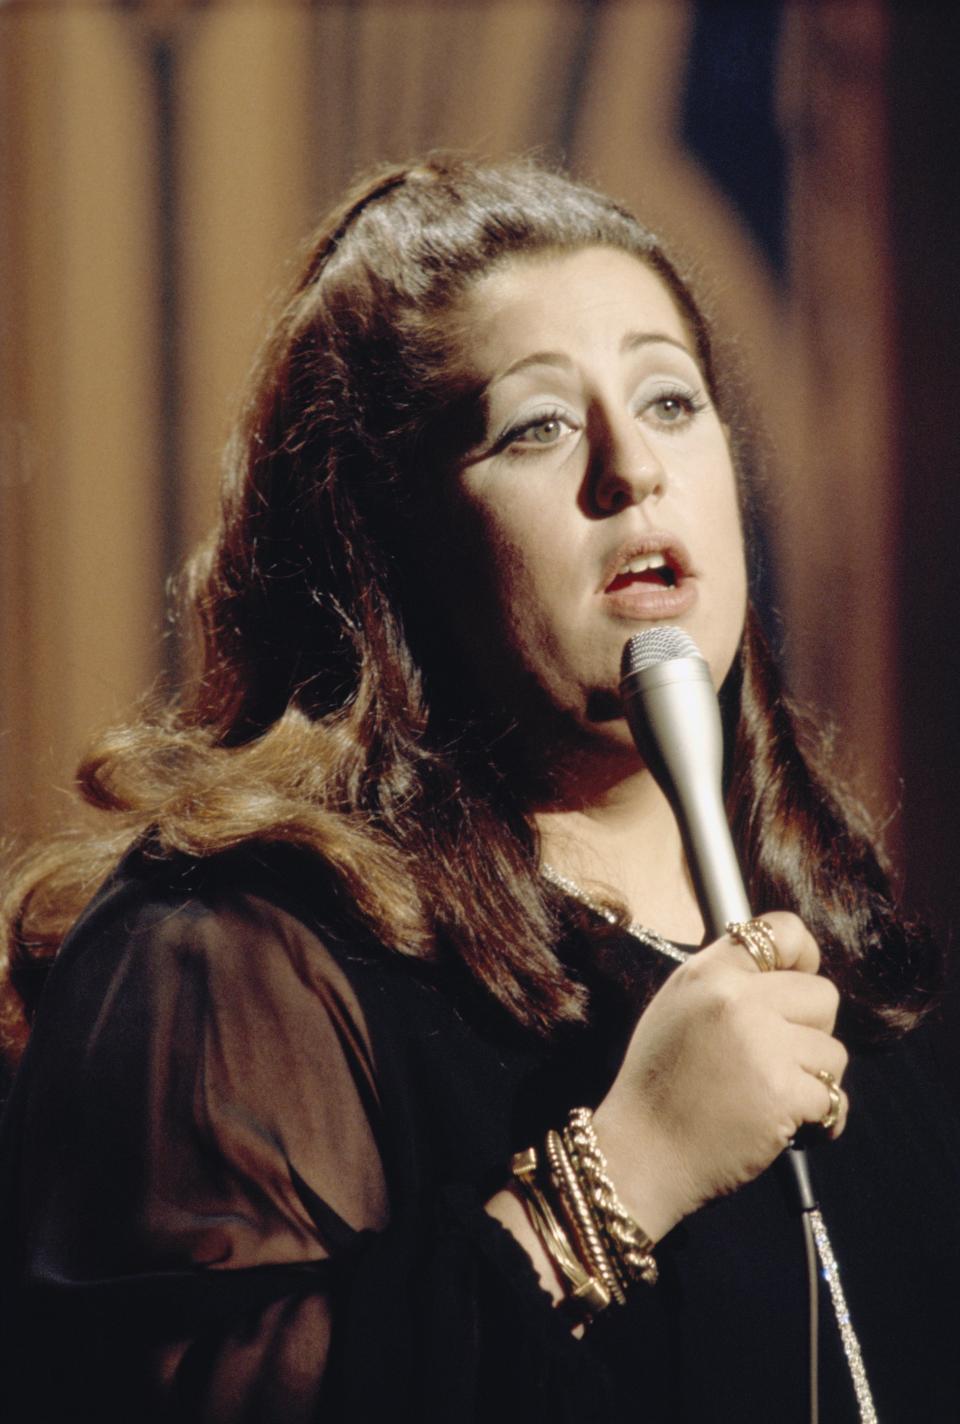 THE TONIGHT SHOW STARRING JOHNNY CARSON -- Aired 01/26/1973 -- Pictured: Guest host Mama Cass Elliot performs -- Photo by: NBCU Photo Bank